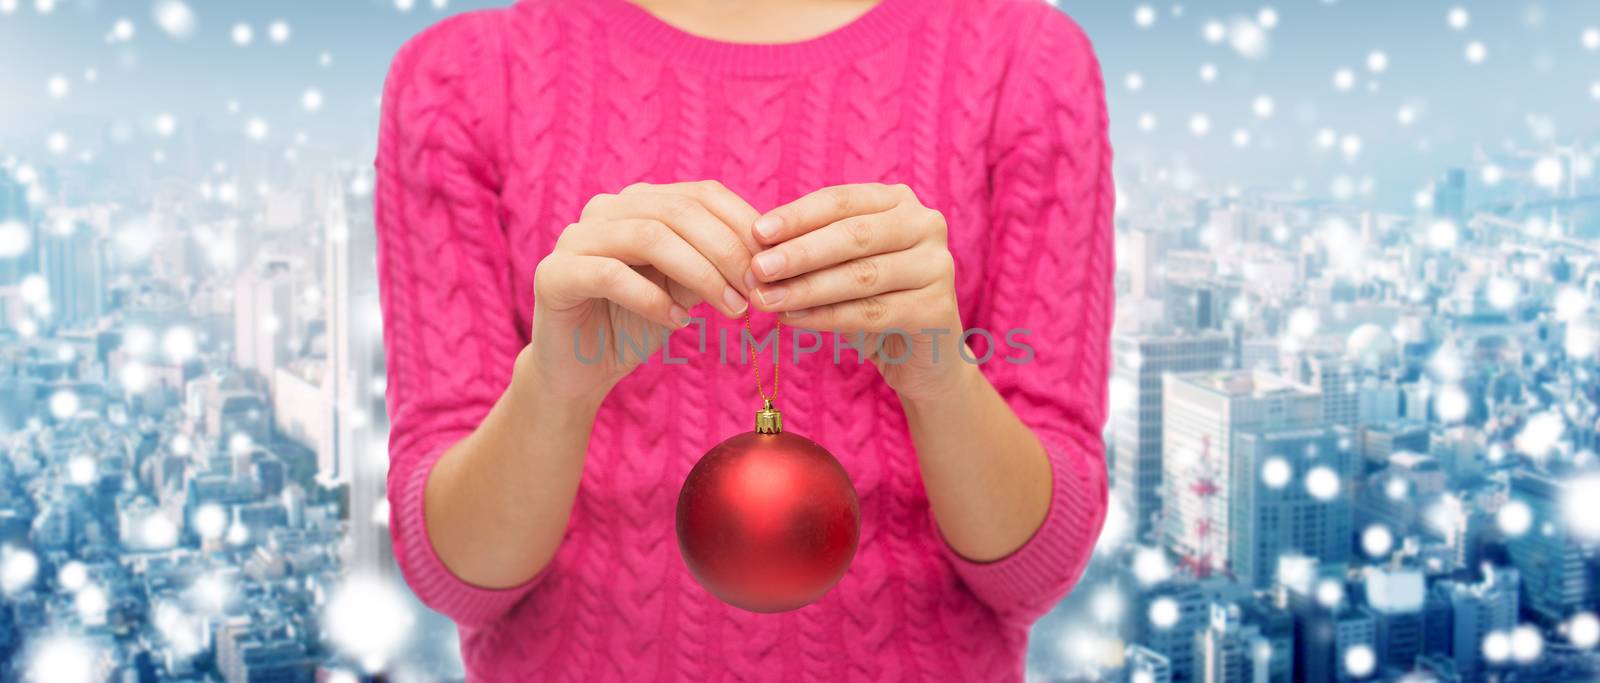 christmas, decoration, holidays and people concept - close up of woman in pink sweater holding christmas ball over snowy city background